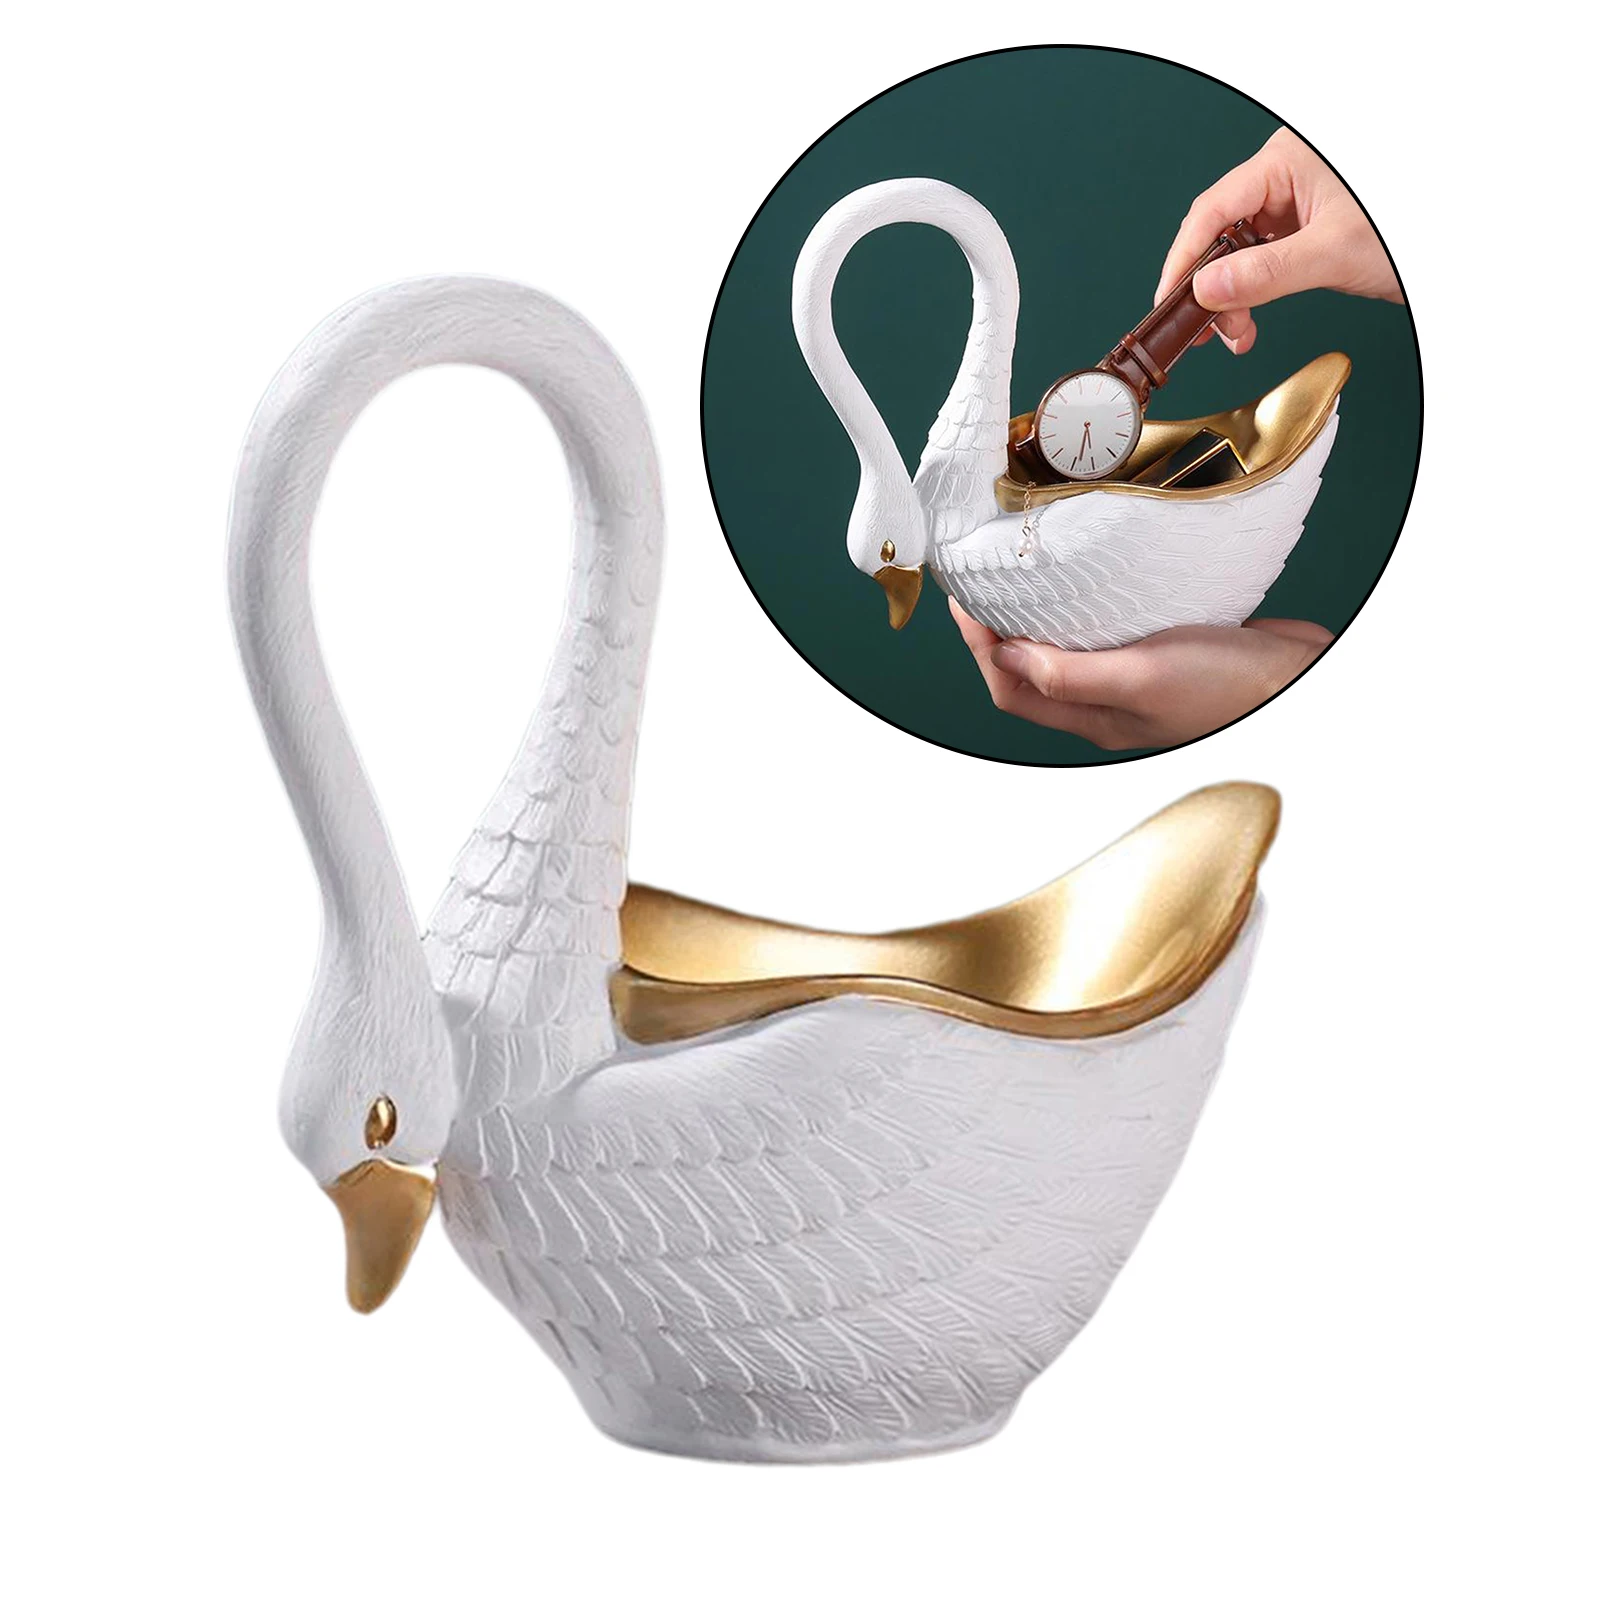 Home decoration for living room table resin Animal statue Crafts candy nut key phone storage box swan figurine wedding gift